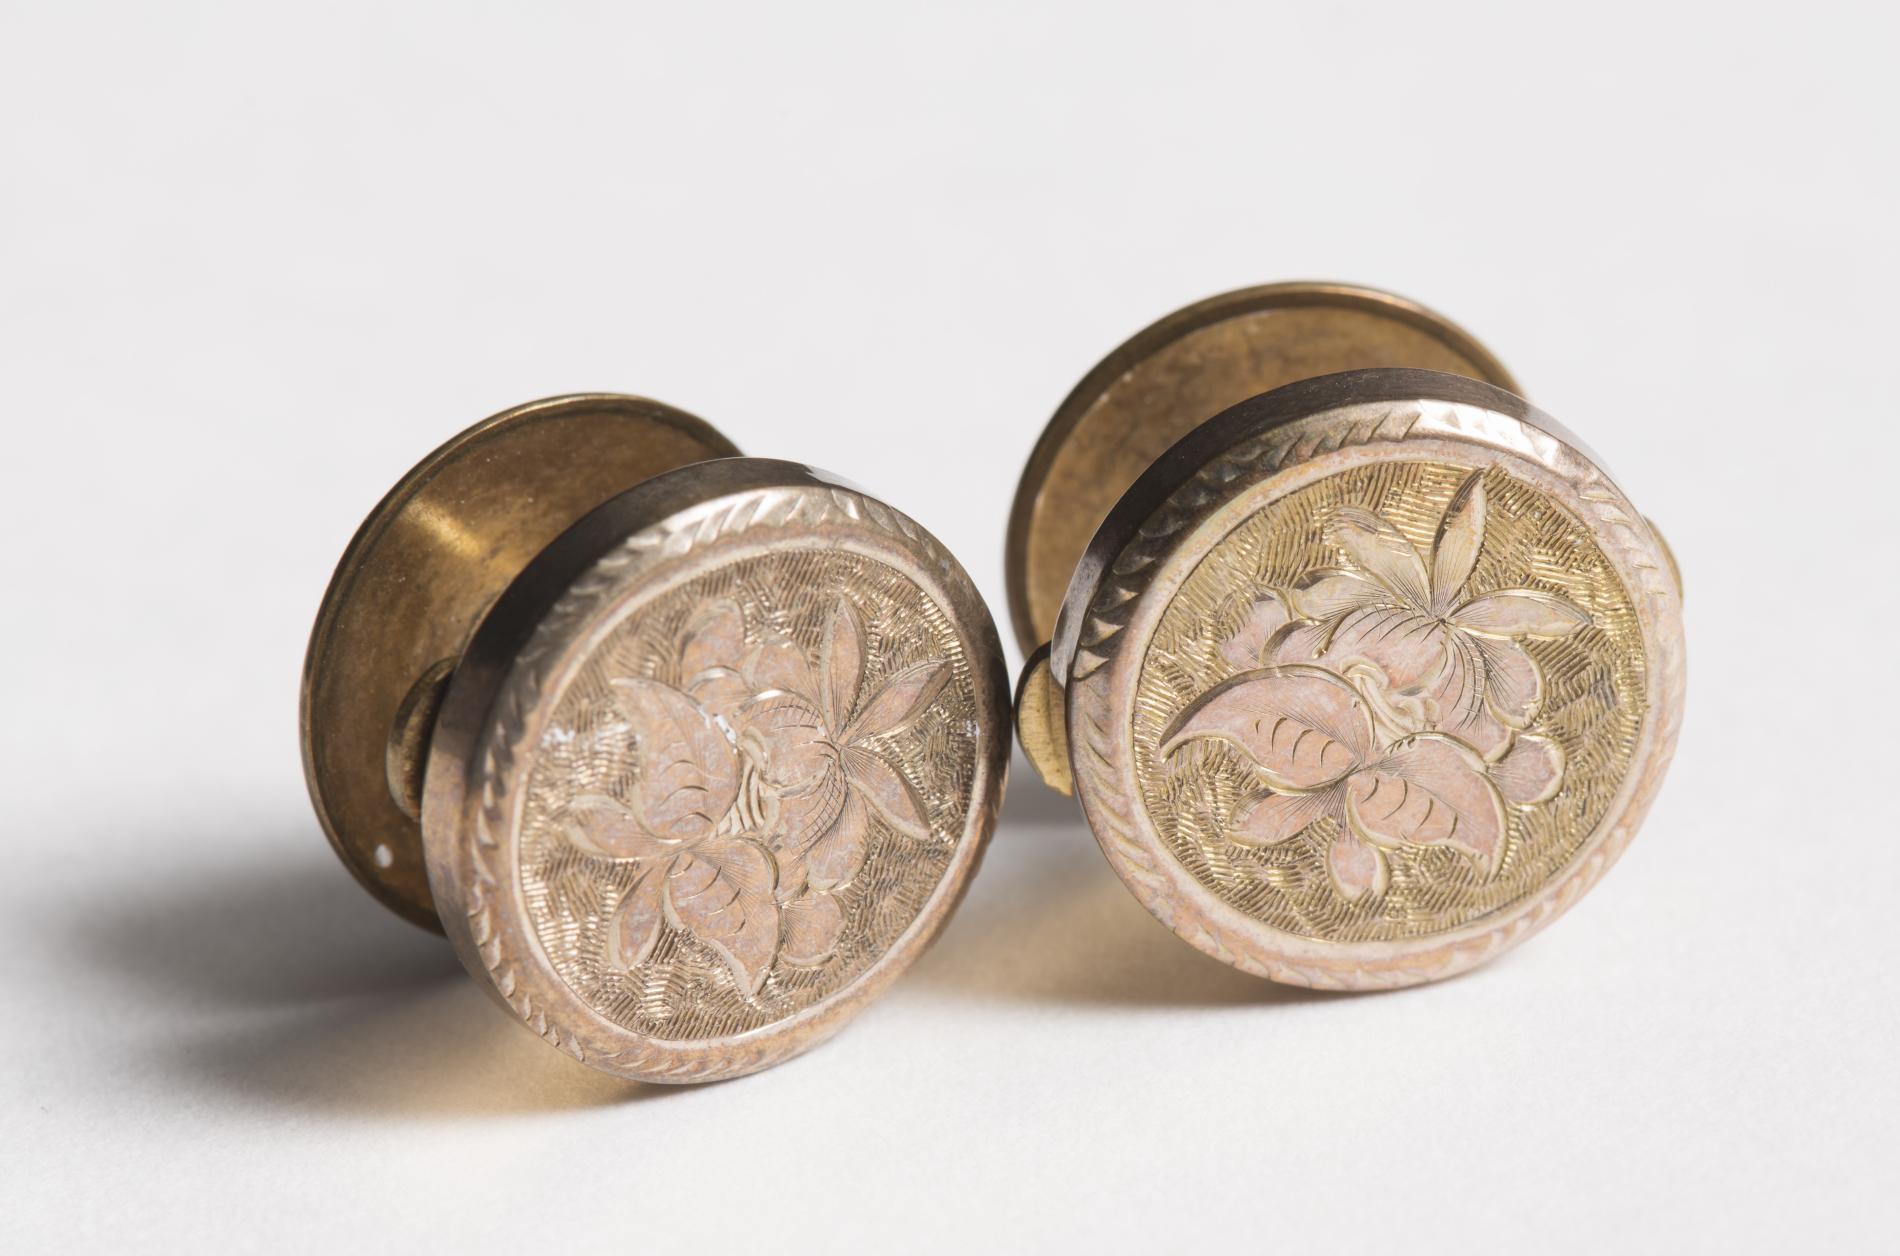 Photograph of two brass coloured cufflinks